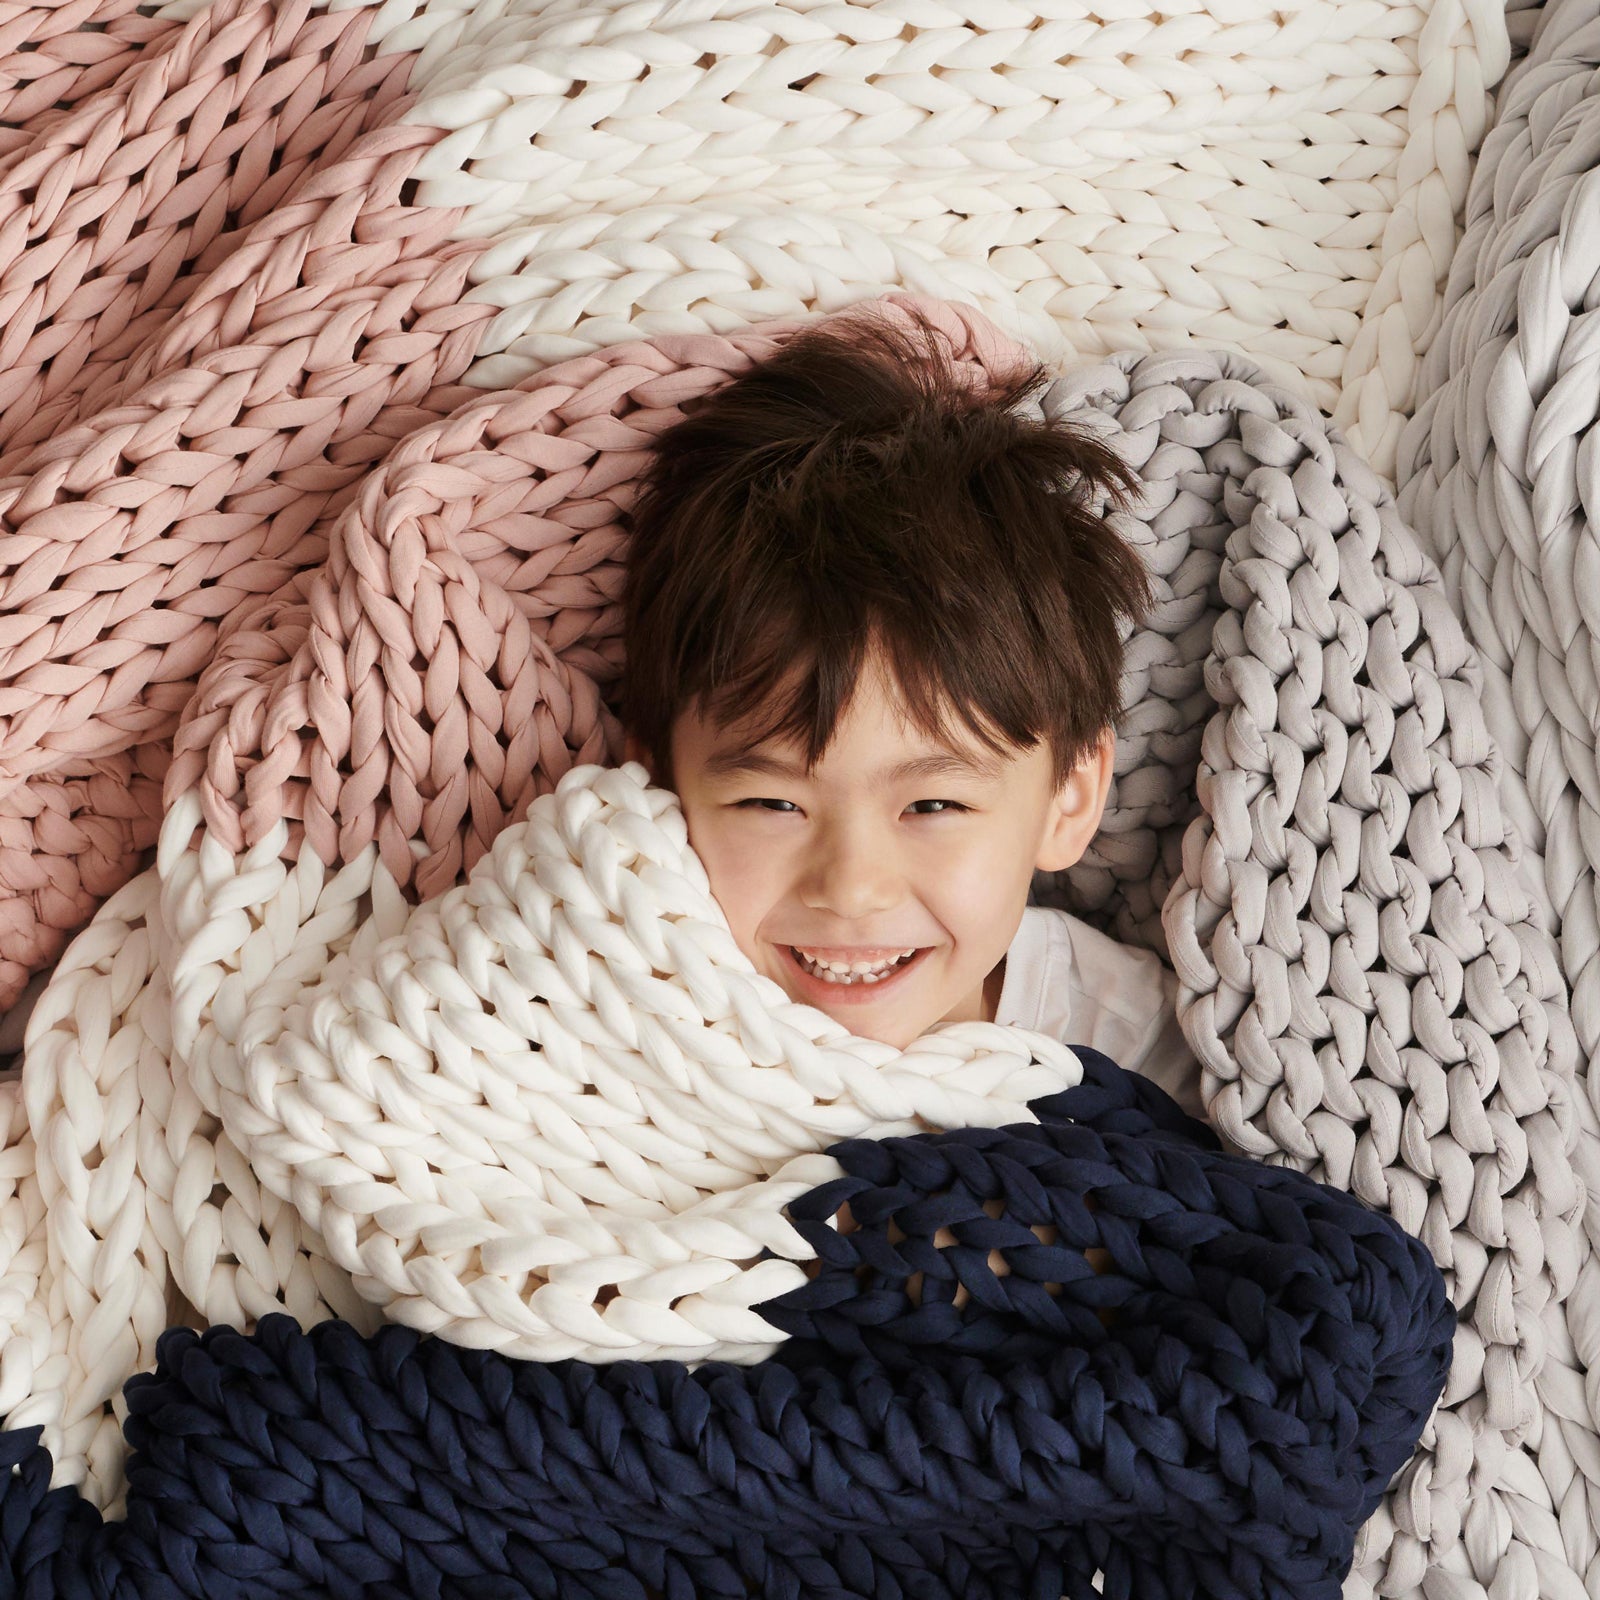 Meet The Nappling: A Weighted Blanket For Kids